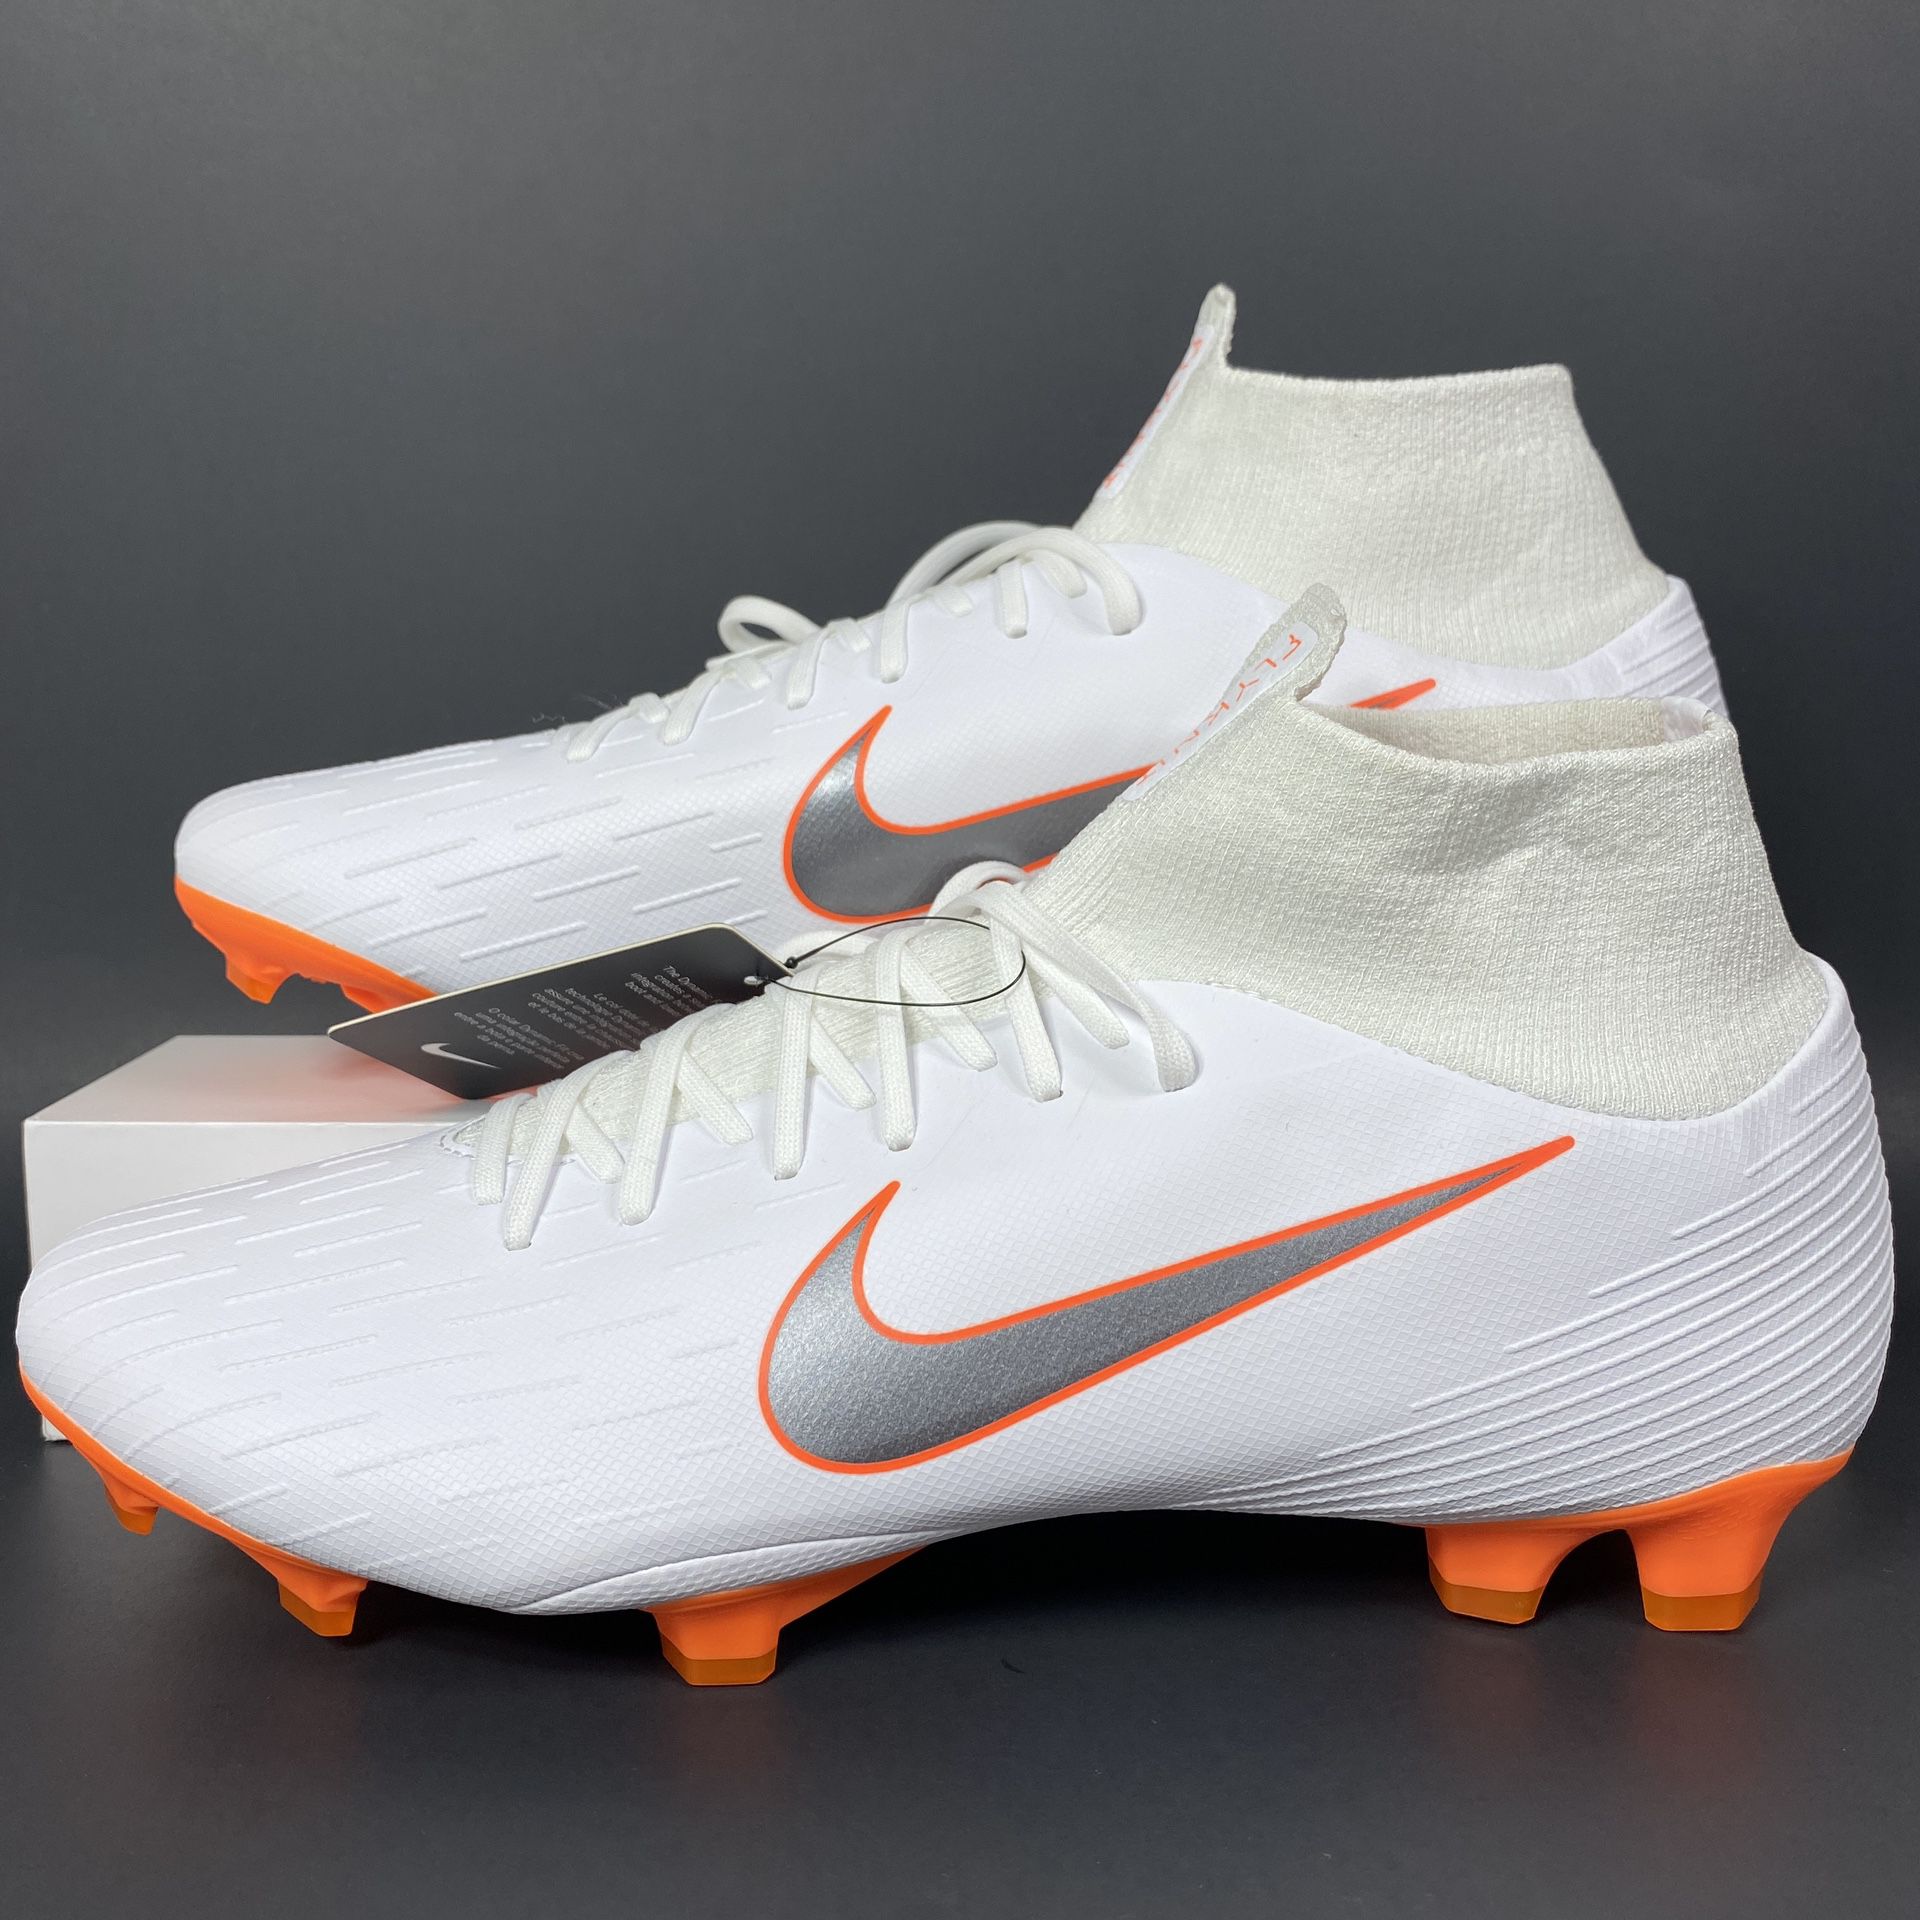 NIKE MERCURIAL SUPERFLY 6 PRO FG WHITE TOTAL ORANGE MENS SOCCER CLEATS SHOES SIZE 11.5 ACC FLYKNIT NEW for Sale in Colony, TX - OfferUp